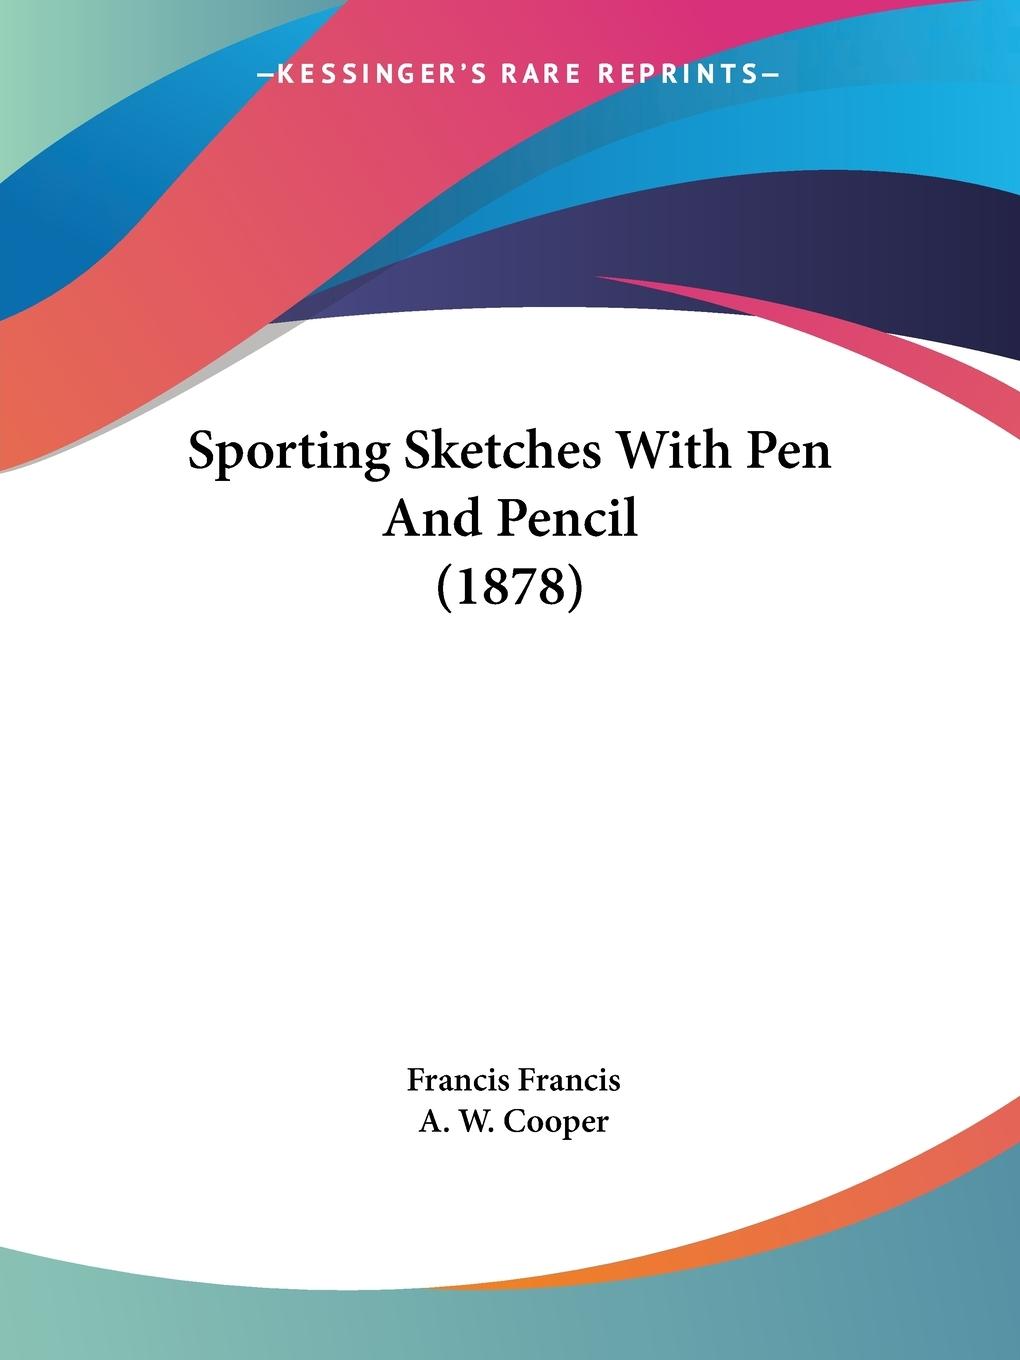 Sporting Sketches With Pen And Pencil (1878) - Francis, Francis Cooper, A. W.